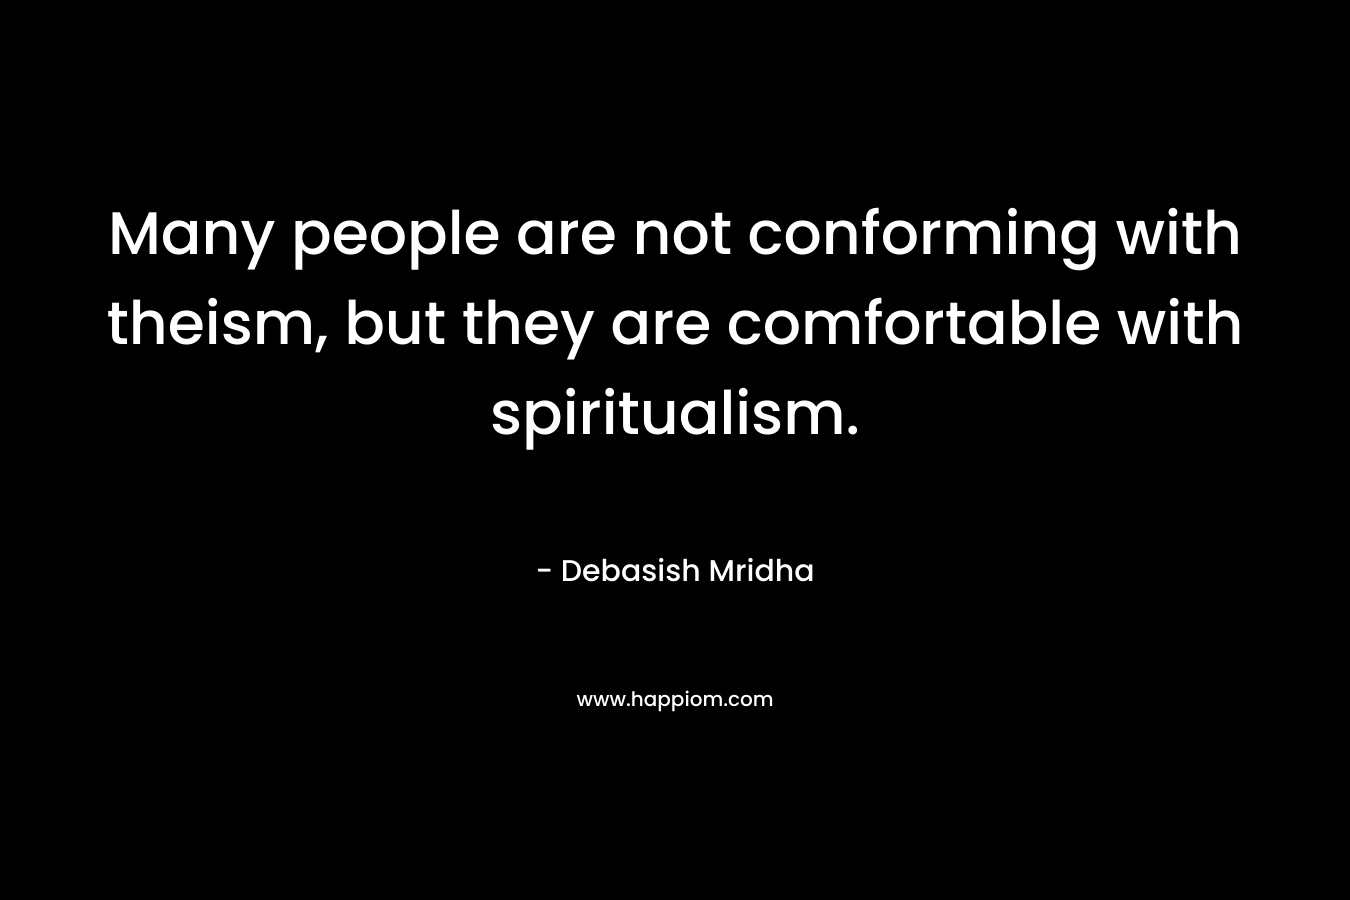 Many people are not conforming with theism, but they are comfortable with spiritualism.